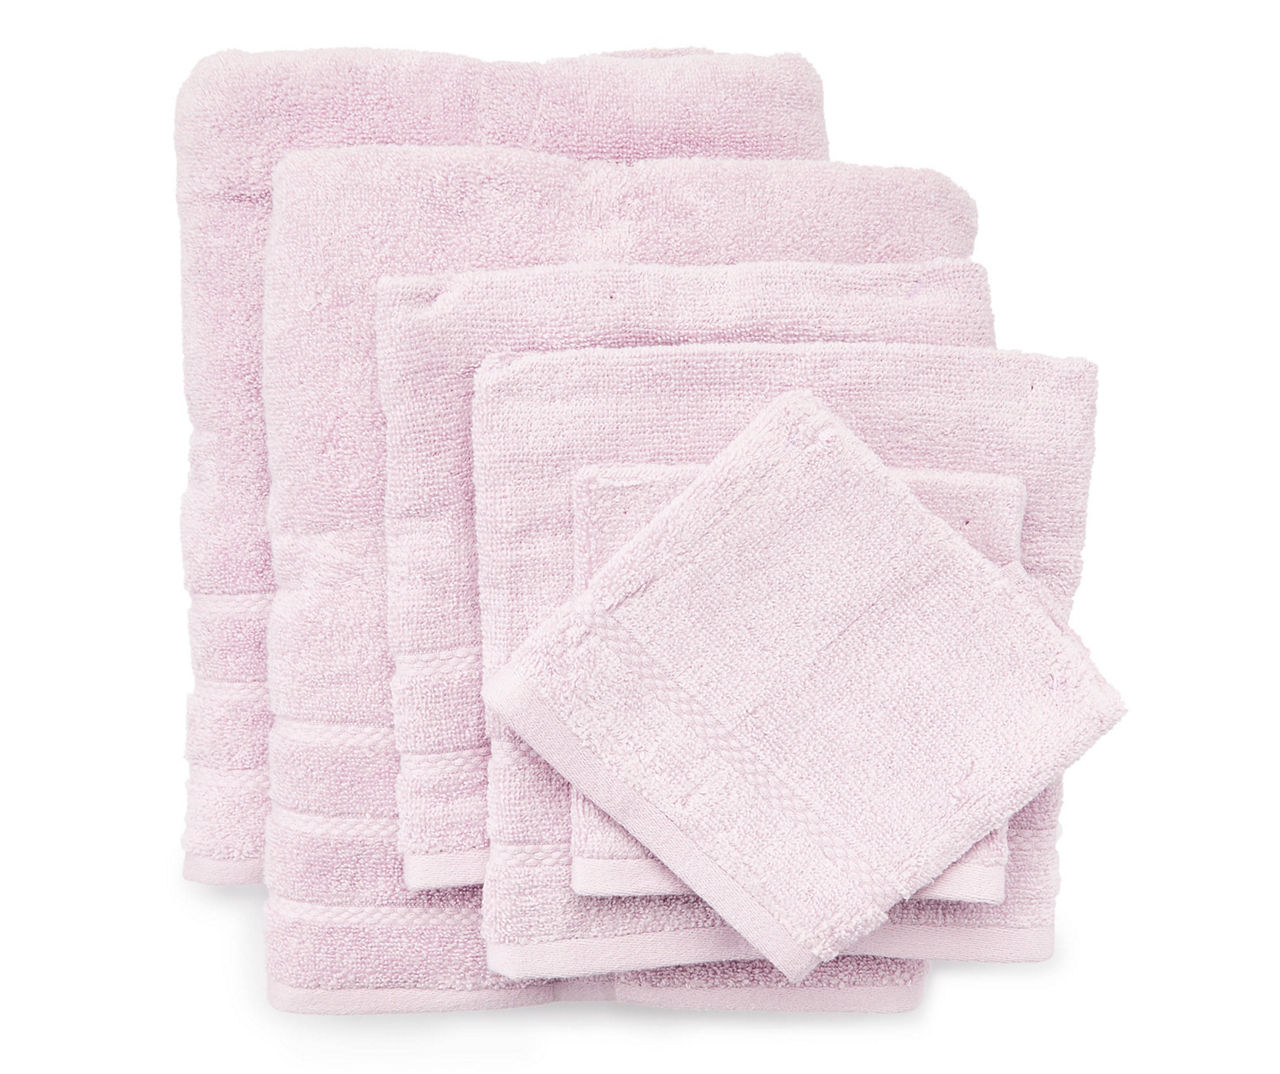 Body by Love Extra Large Bath Towel Set